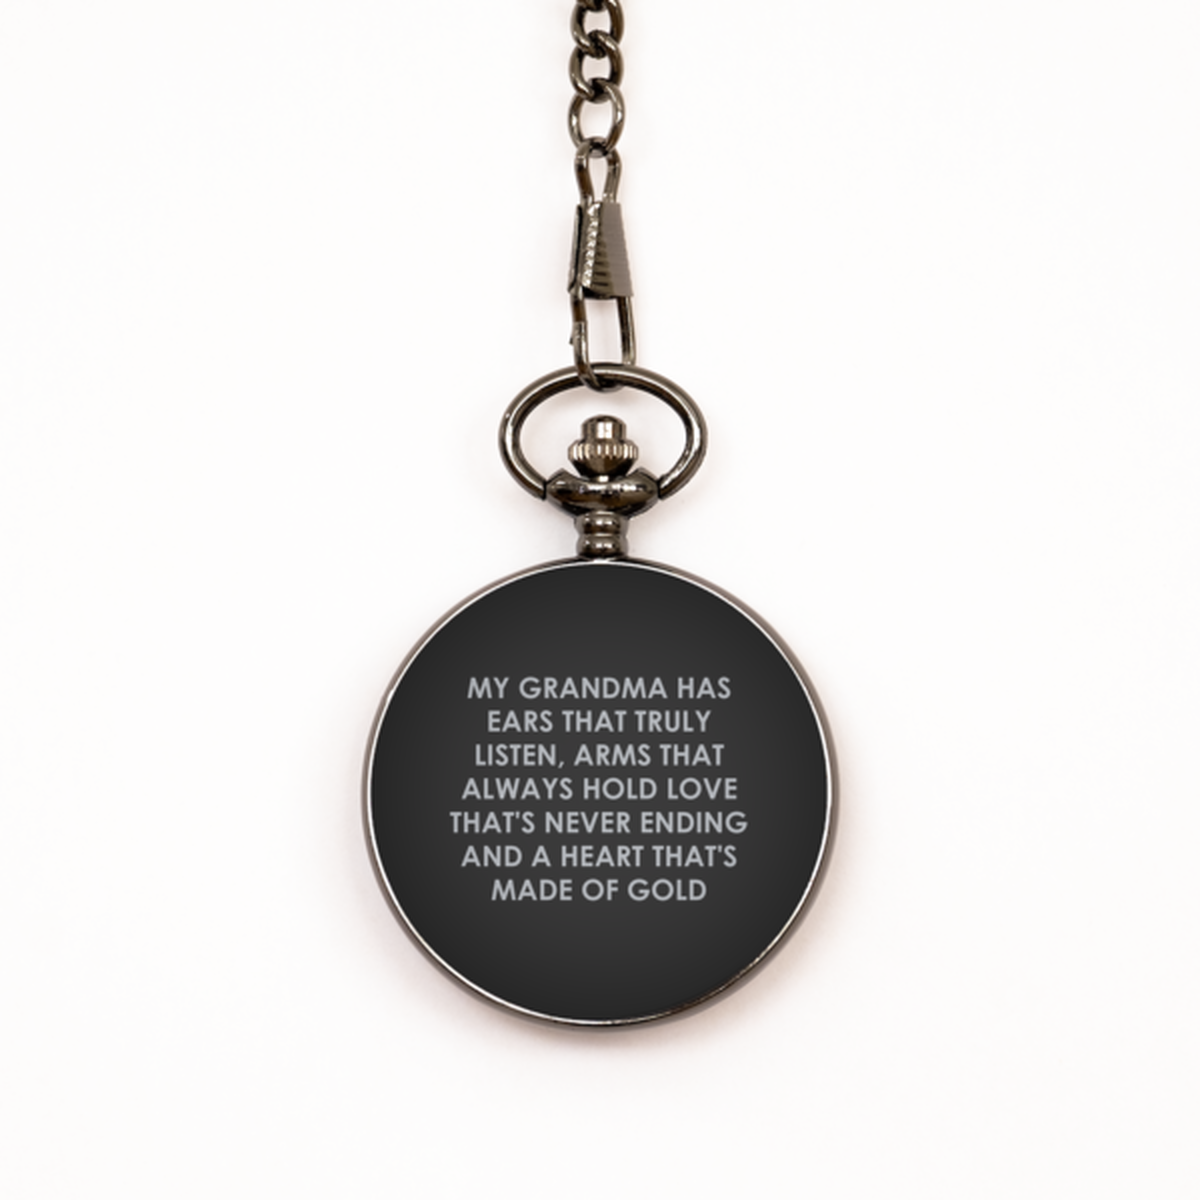 To My Grandma Black Pocket Watch, Heart That's Made Of Gold, Mothers Day Gifts For Grandma From Granddaughter, Birthday Gifts For Women